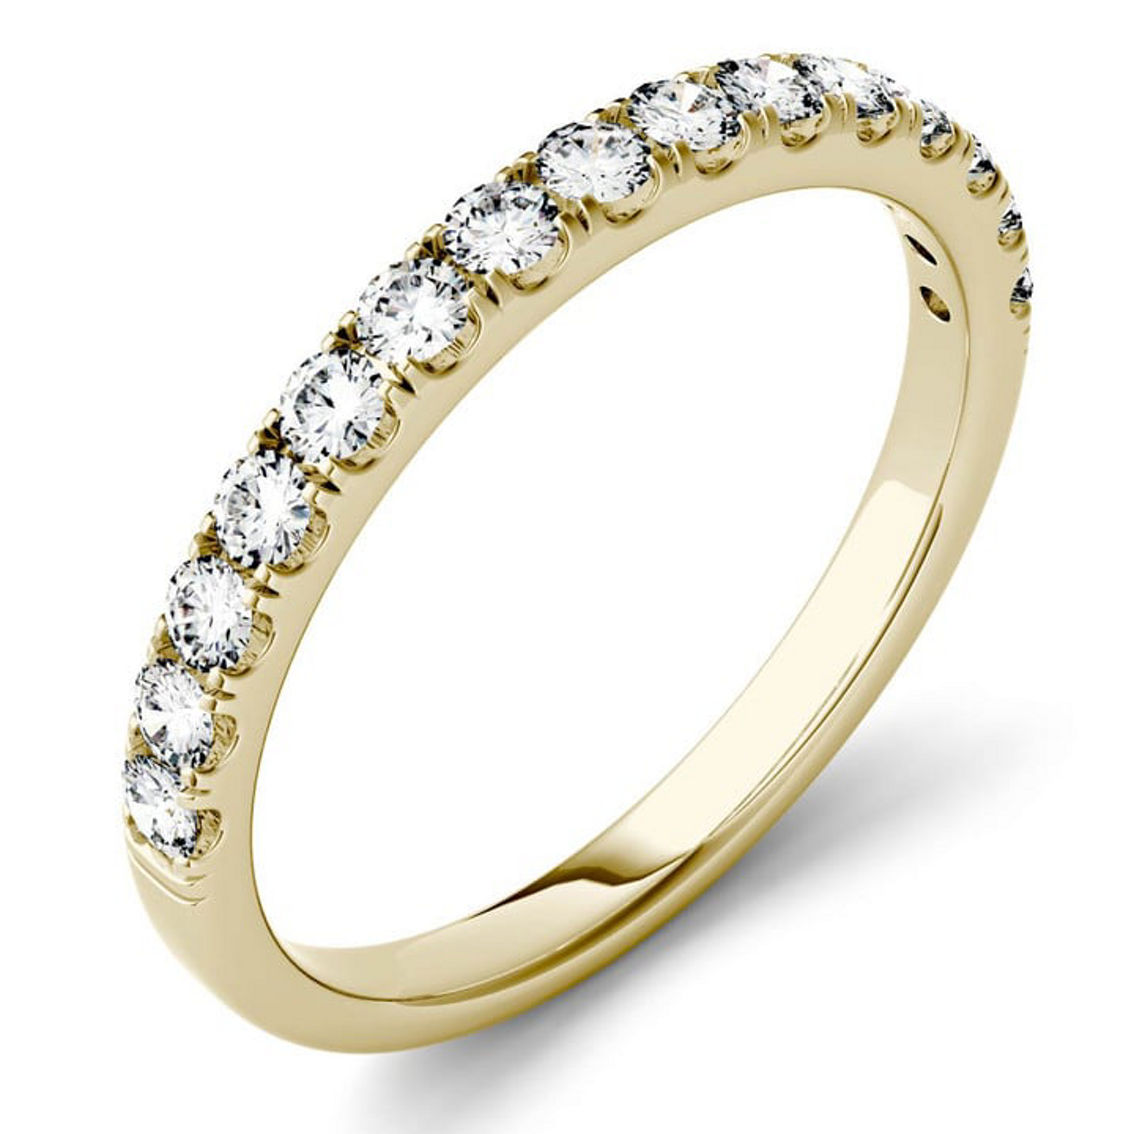 Charles & Colvard 0.38cttw Moissanite Wedding Band in 14k Yellow Gold - Image 2 of 5